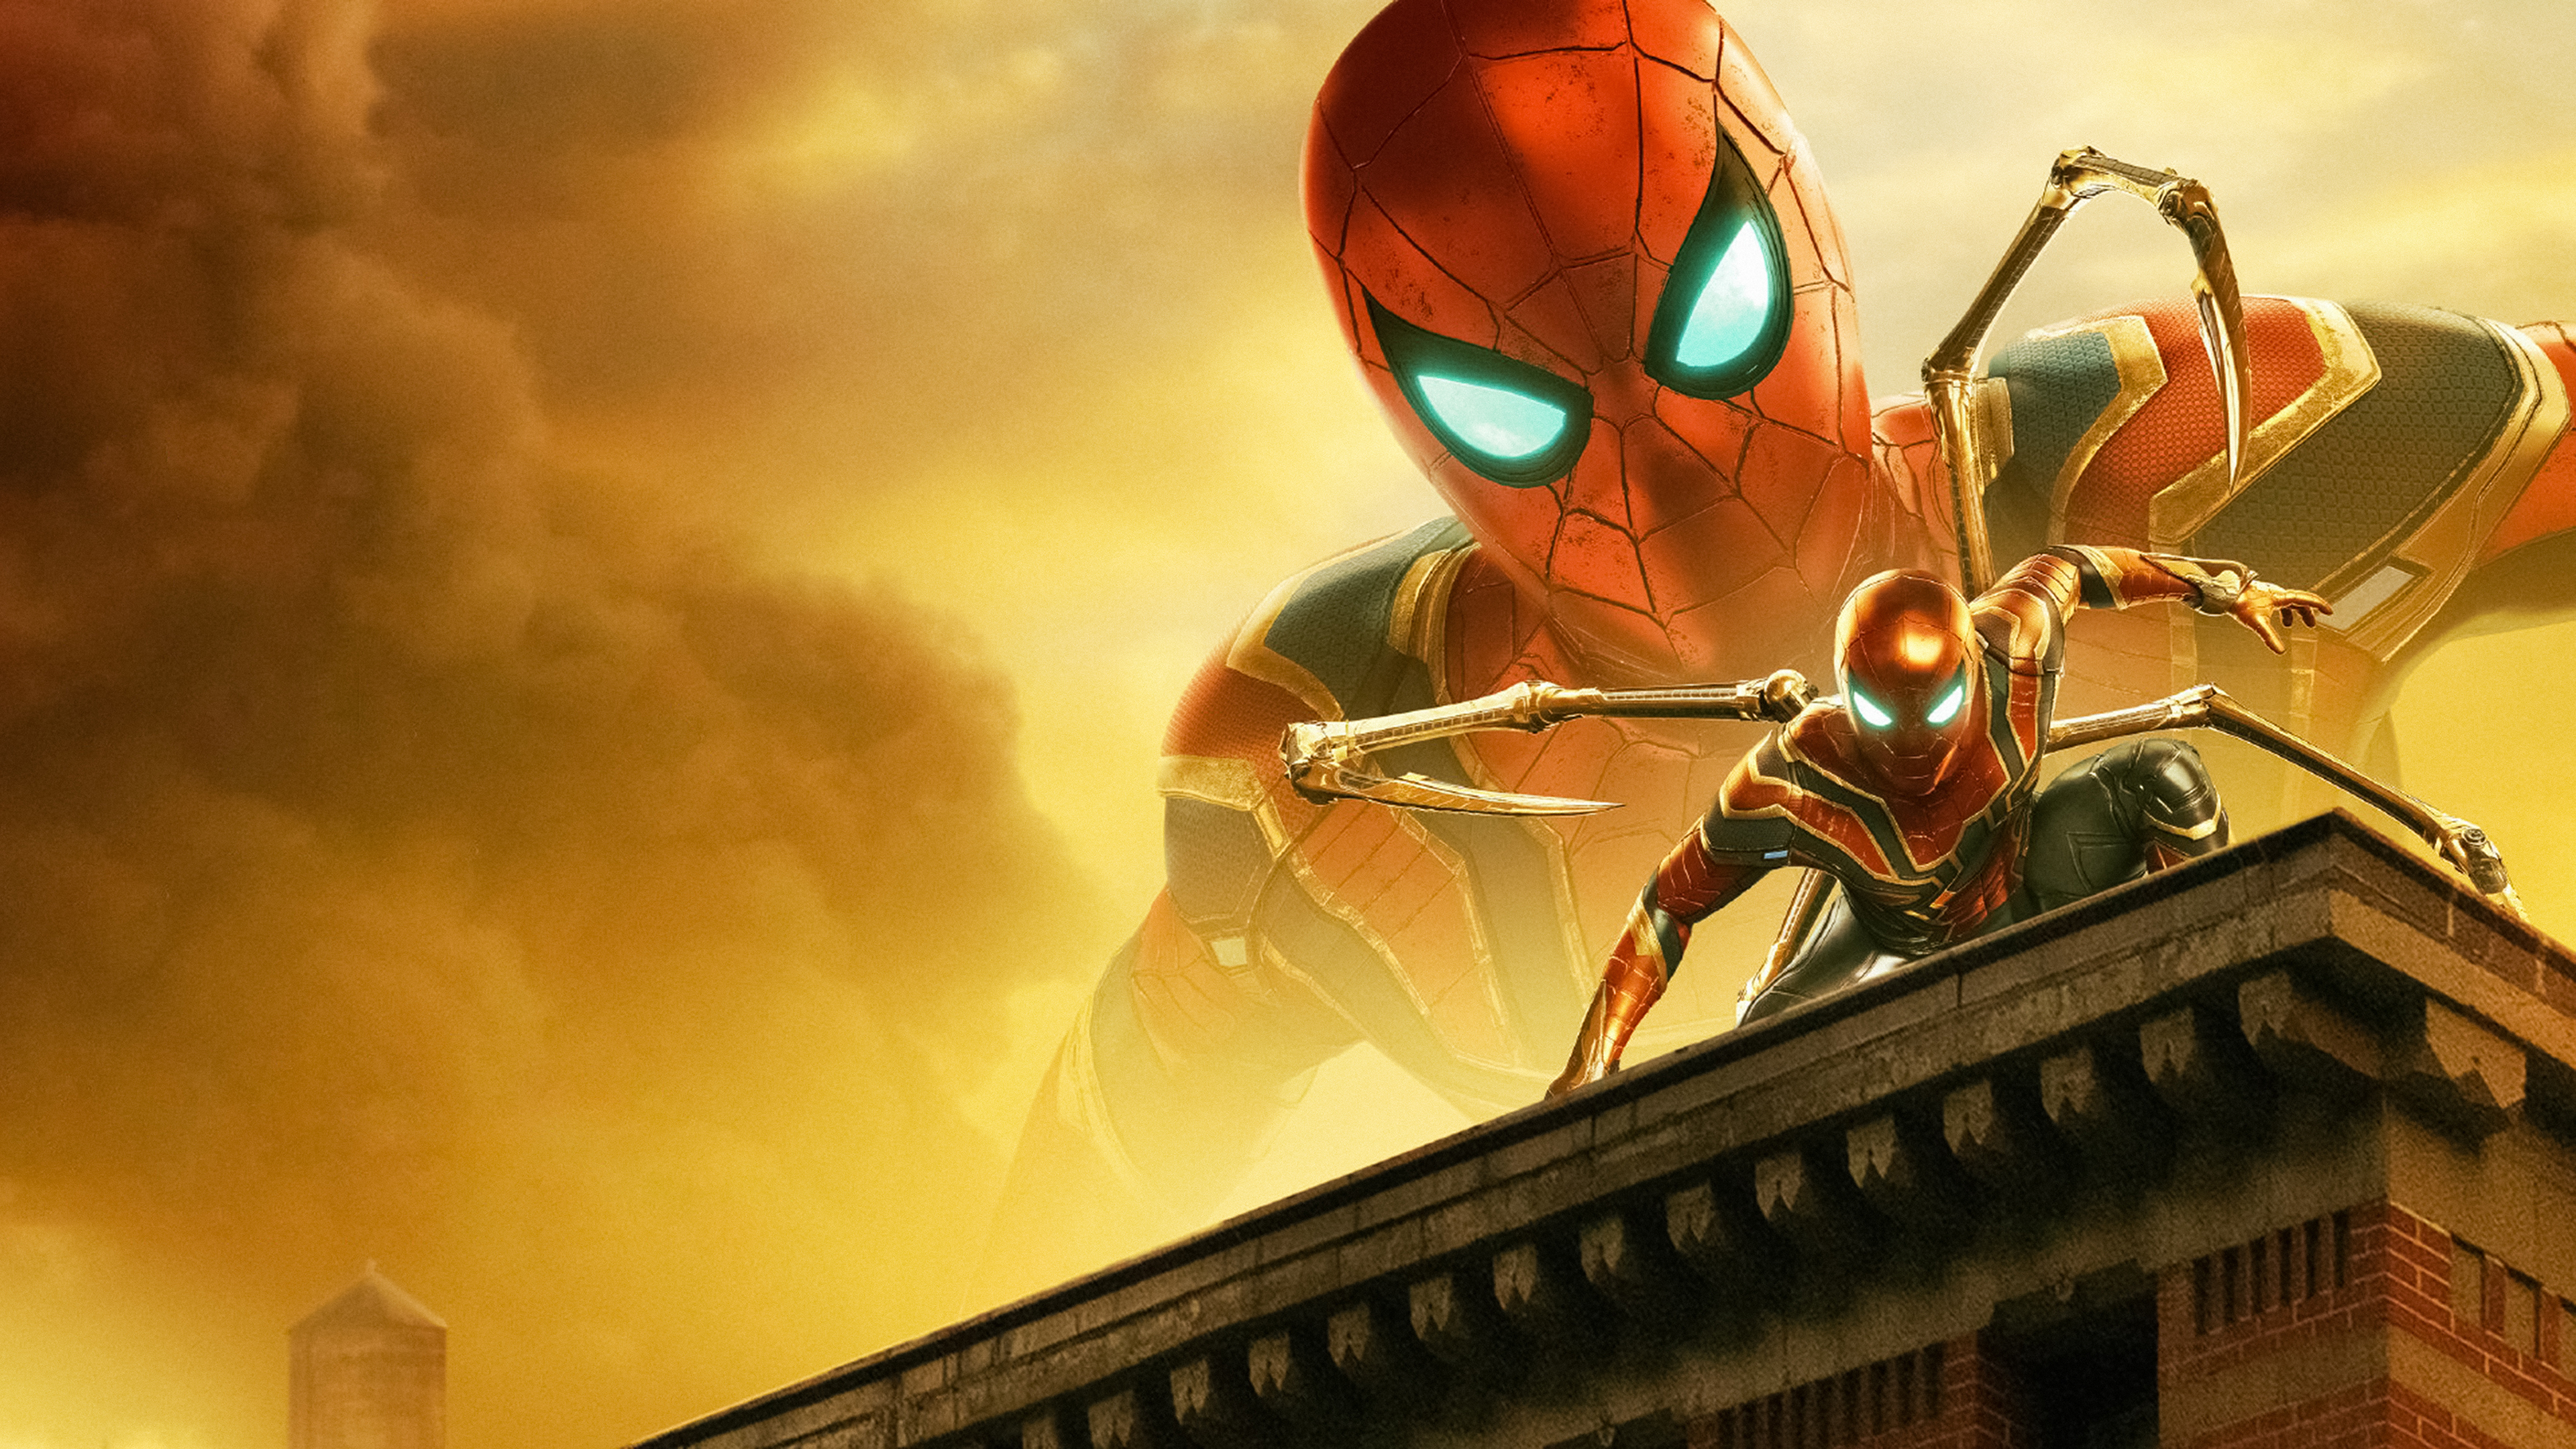 Iron Spider in Spider-Man Far From Home 4K